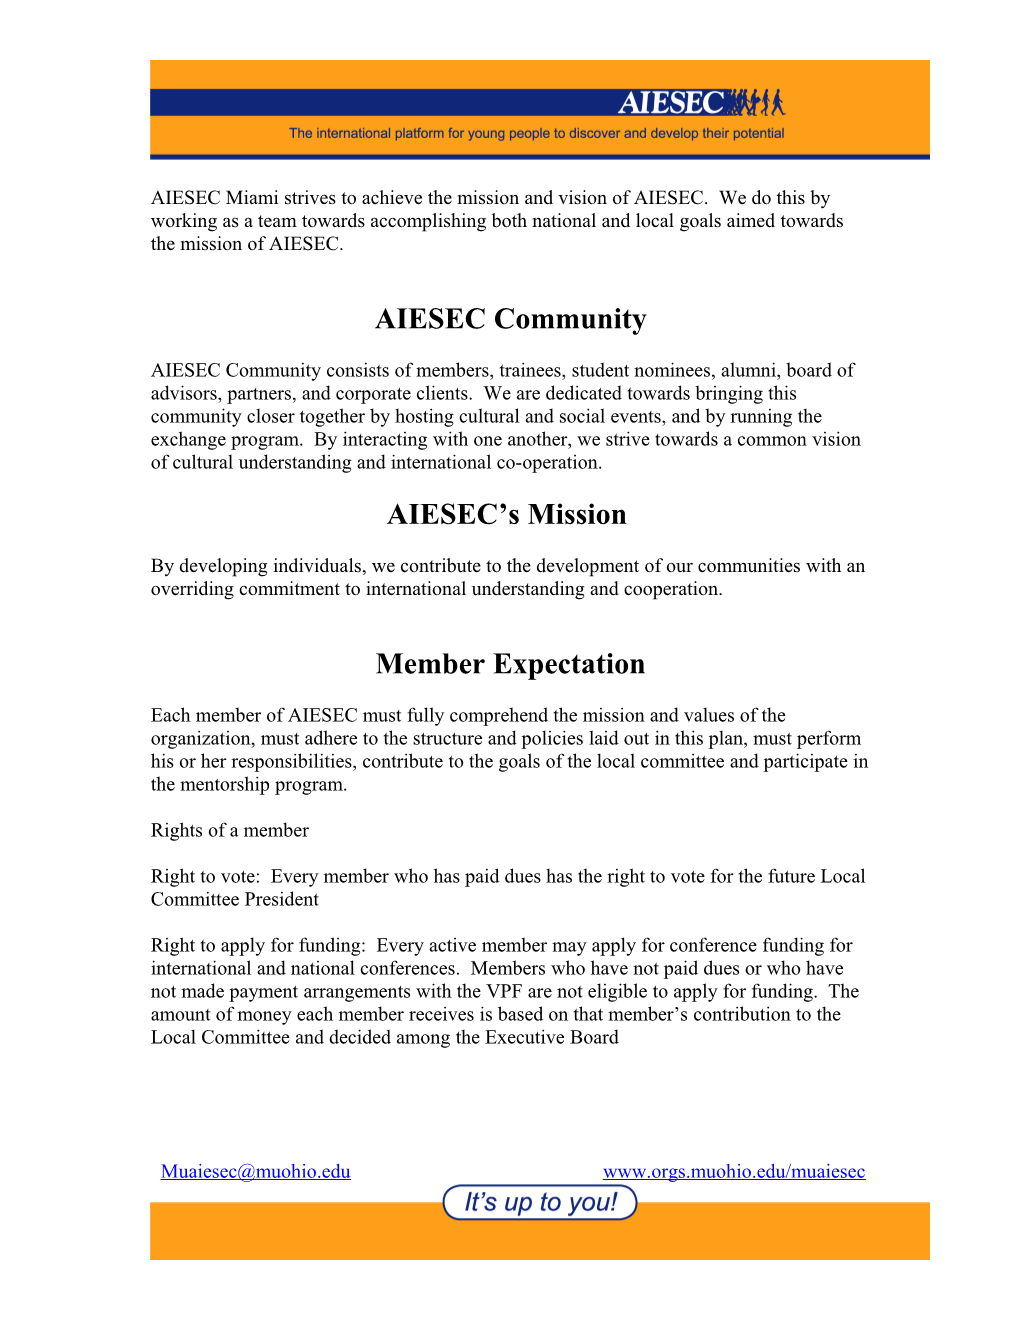 AIESEC Miami Strives to Achieve the Mission and Vision of Aiesec